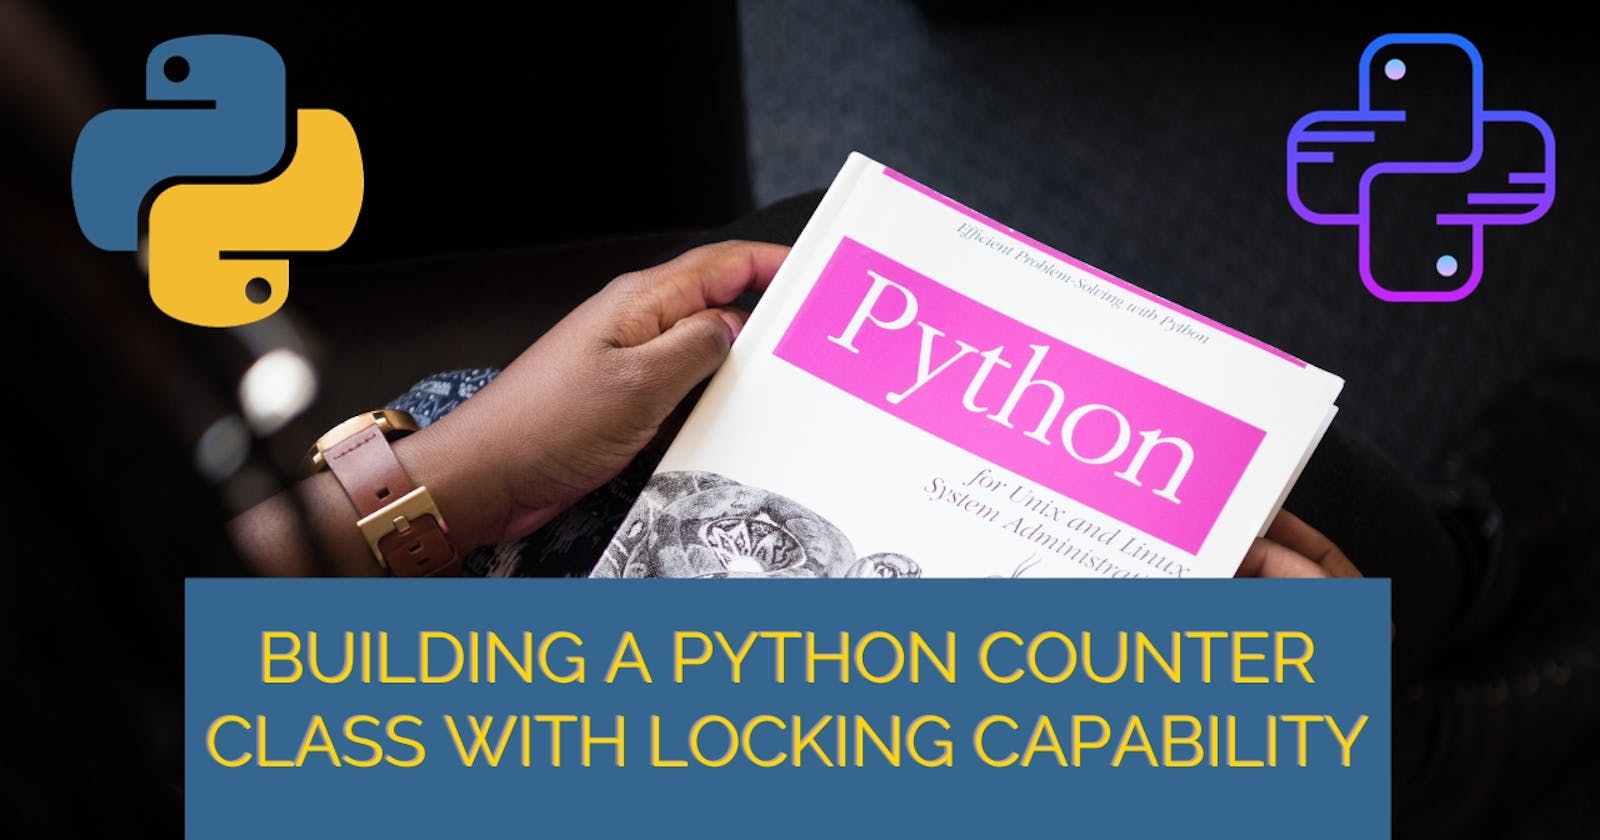 Building a Python Counter Class with Locking Capability